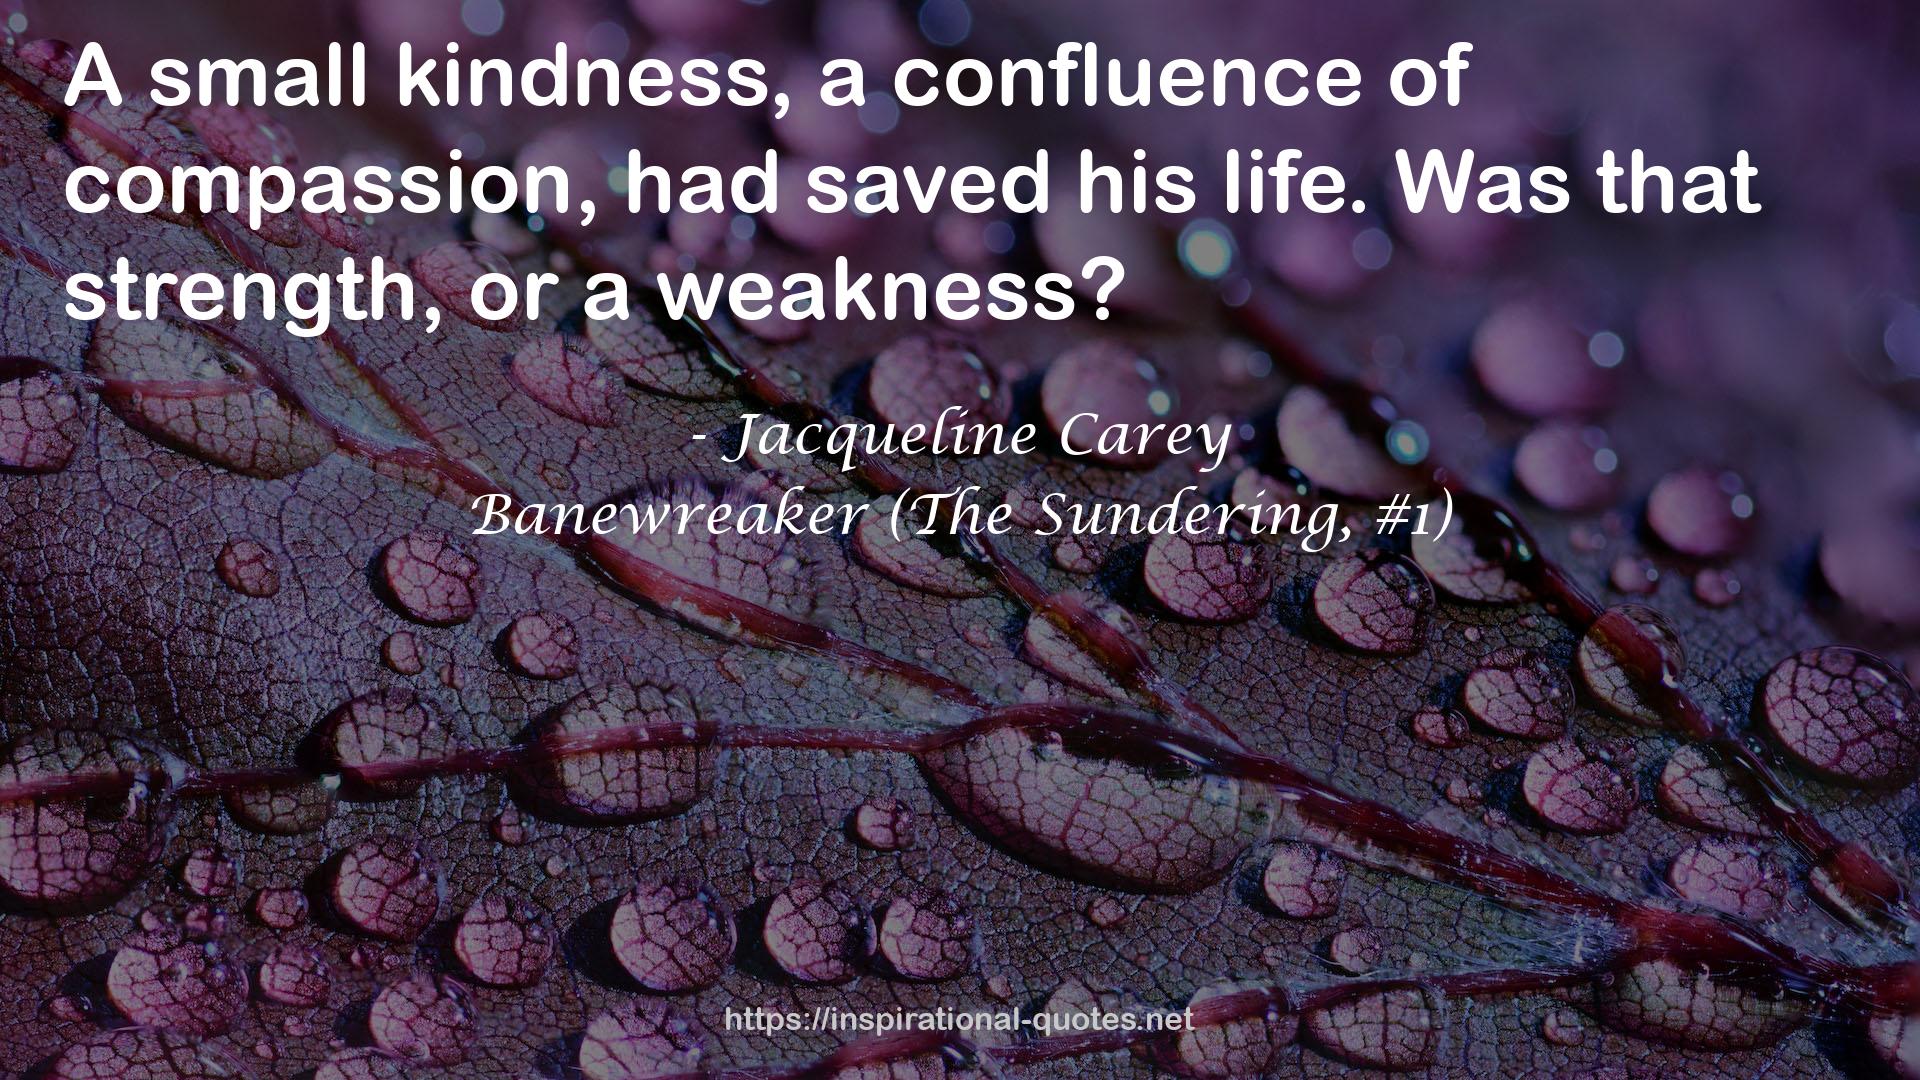 Banewreaker (The Sundering, #1) QUOTES